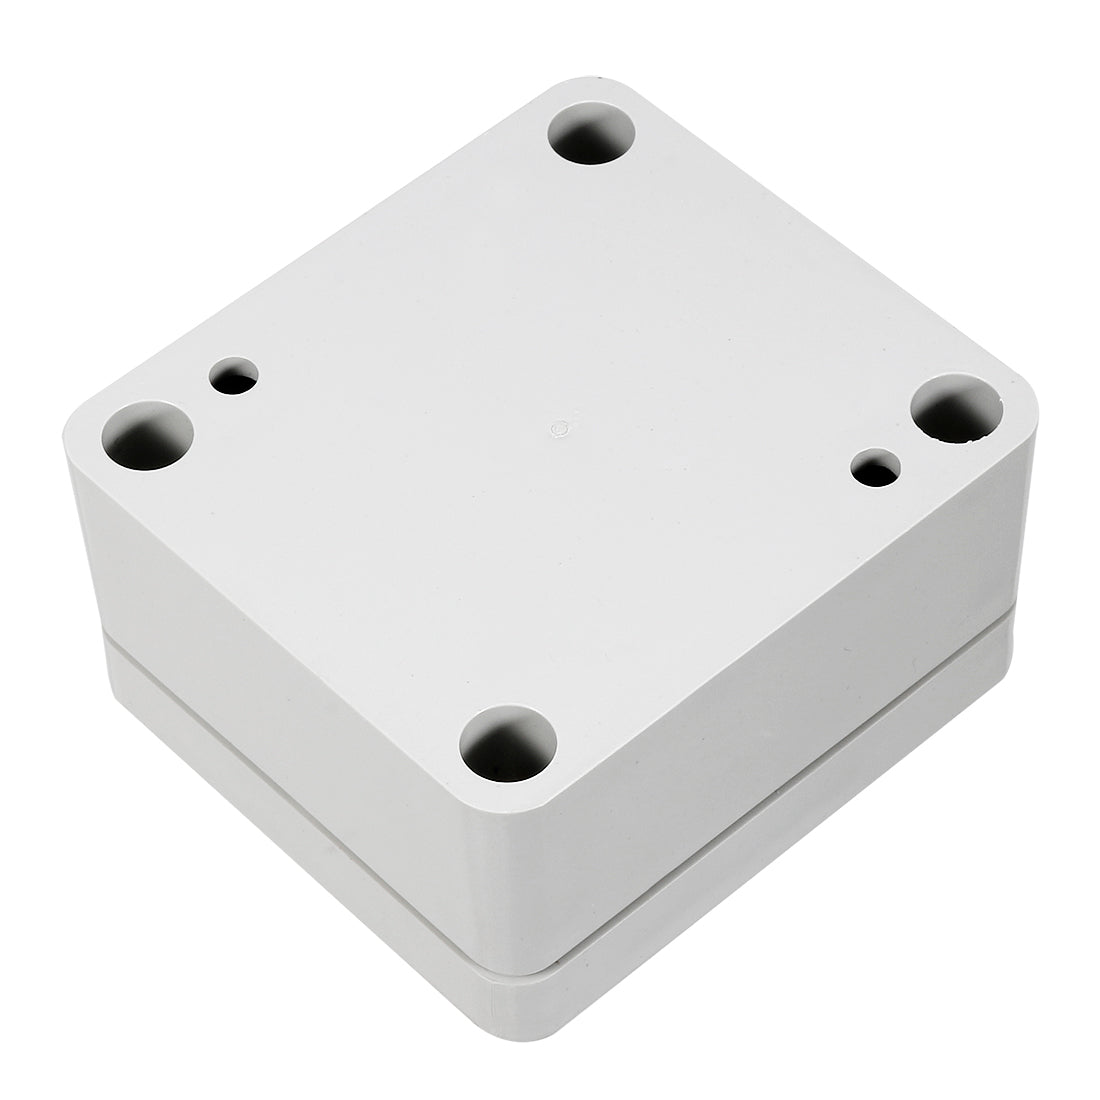 uxcell Uxcell 2pcs 2.48" x 2.24" x 1.38" (63mmx57mmx35mm) ABS Junction Box Universal Project Enclosure